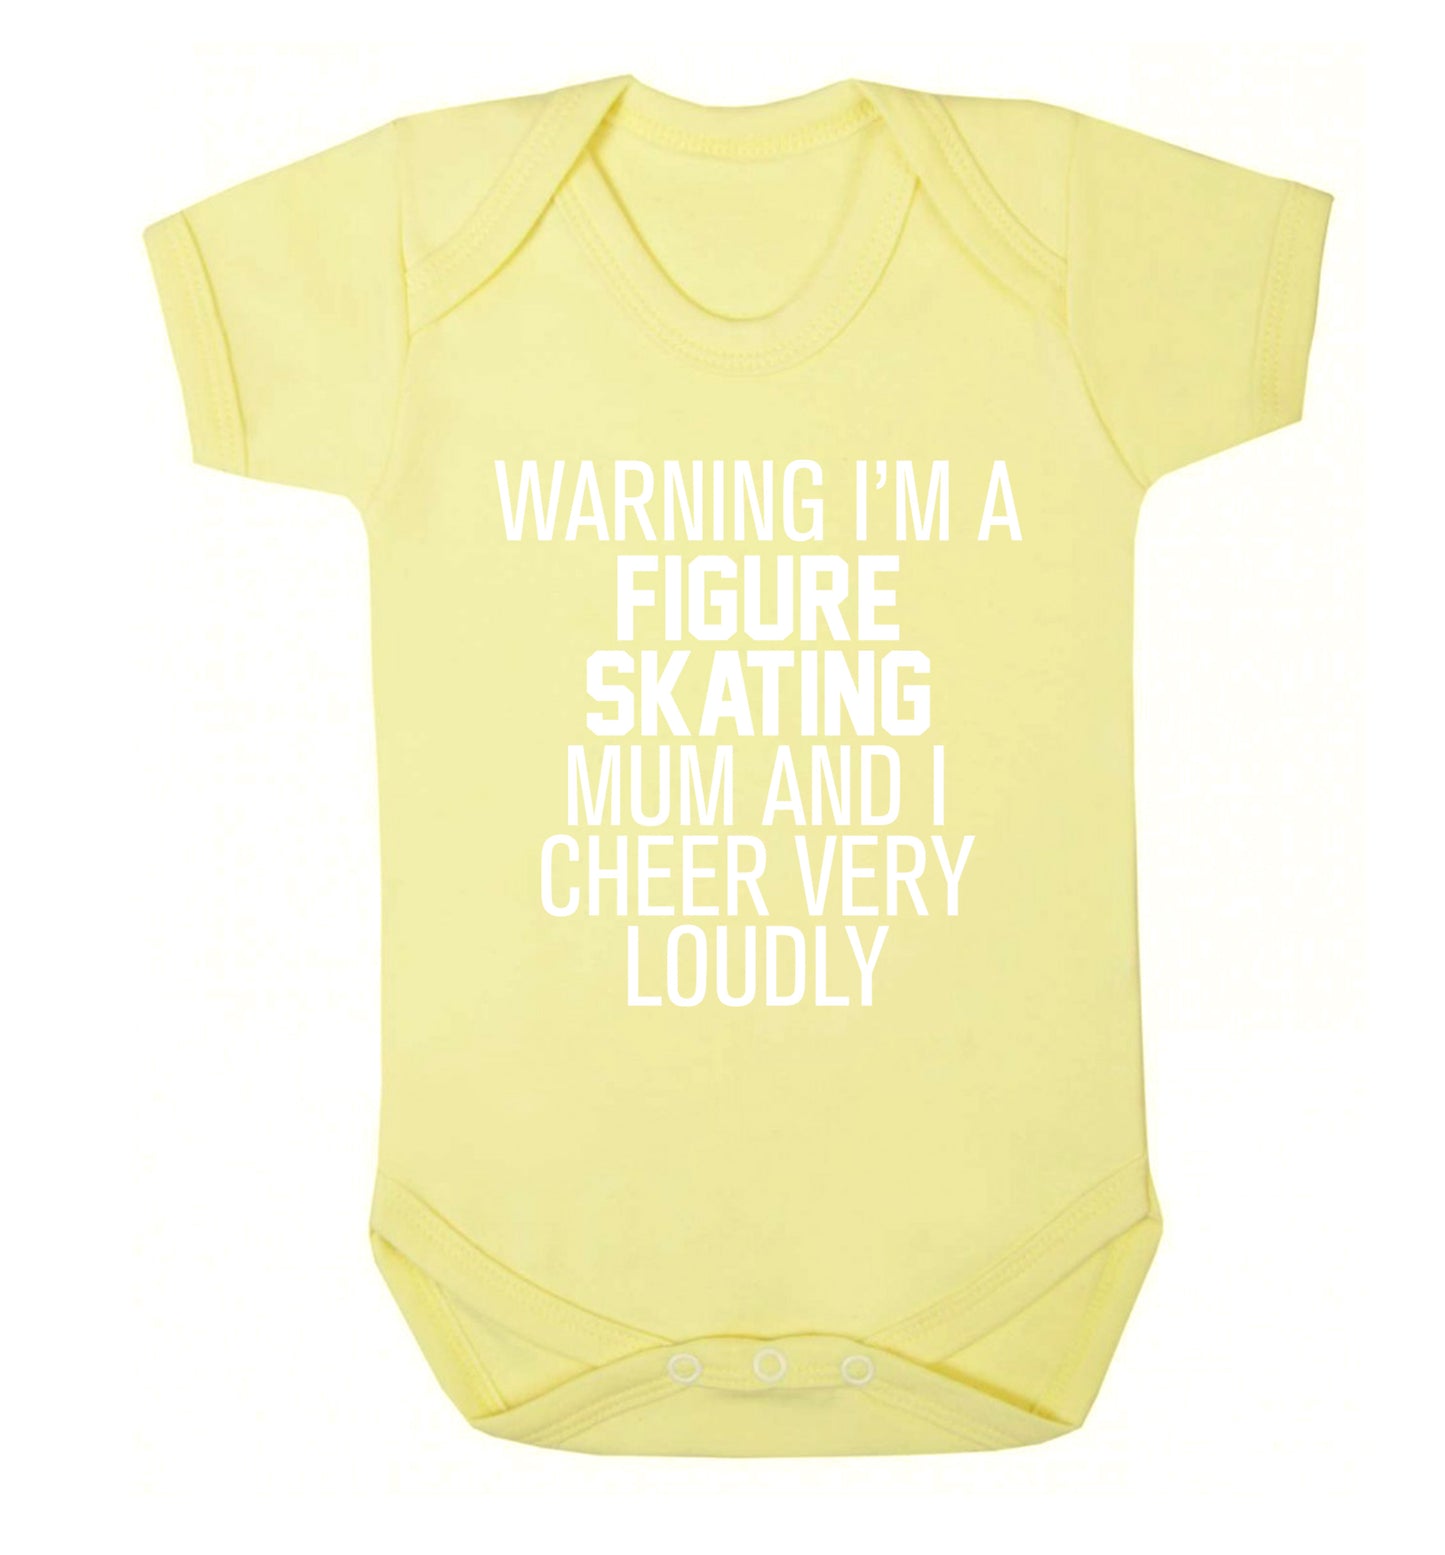 Warning I'm a figure skating mum and I cheer very loudly Baby Vest pale yellow 18-24 months